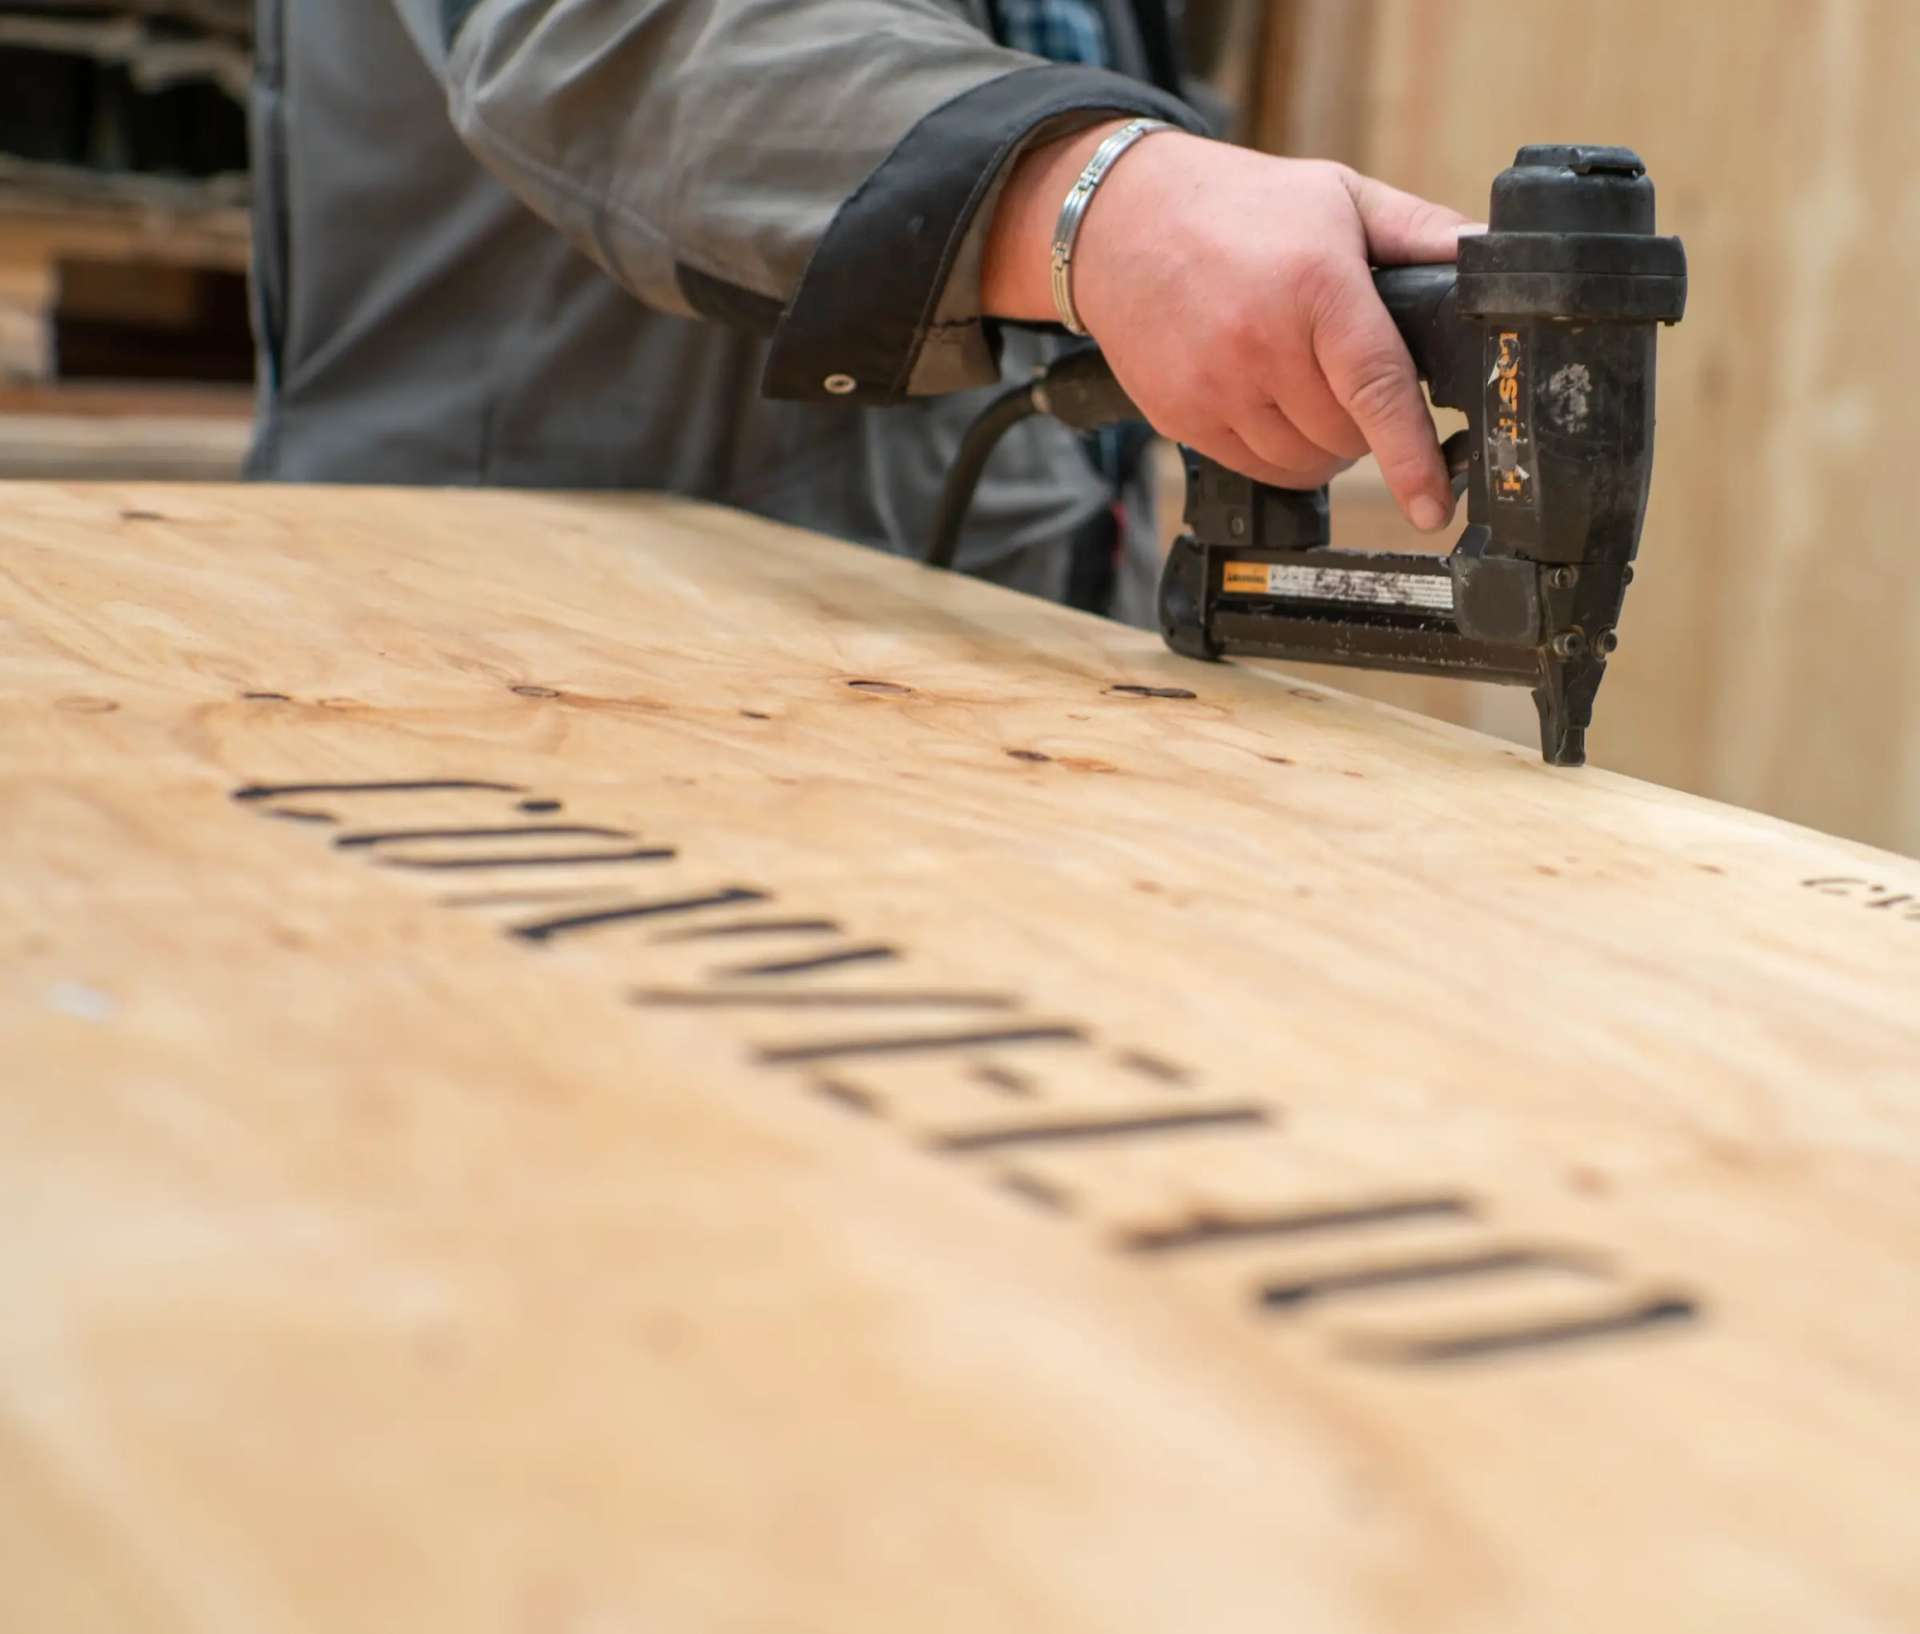 An image of a shipping crate with the company name ‘CONVELIO’ stamped in black, a hand holding a drill against the wooden crate.